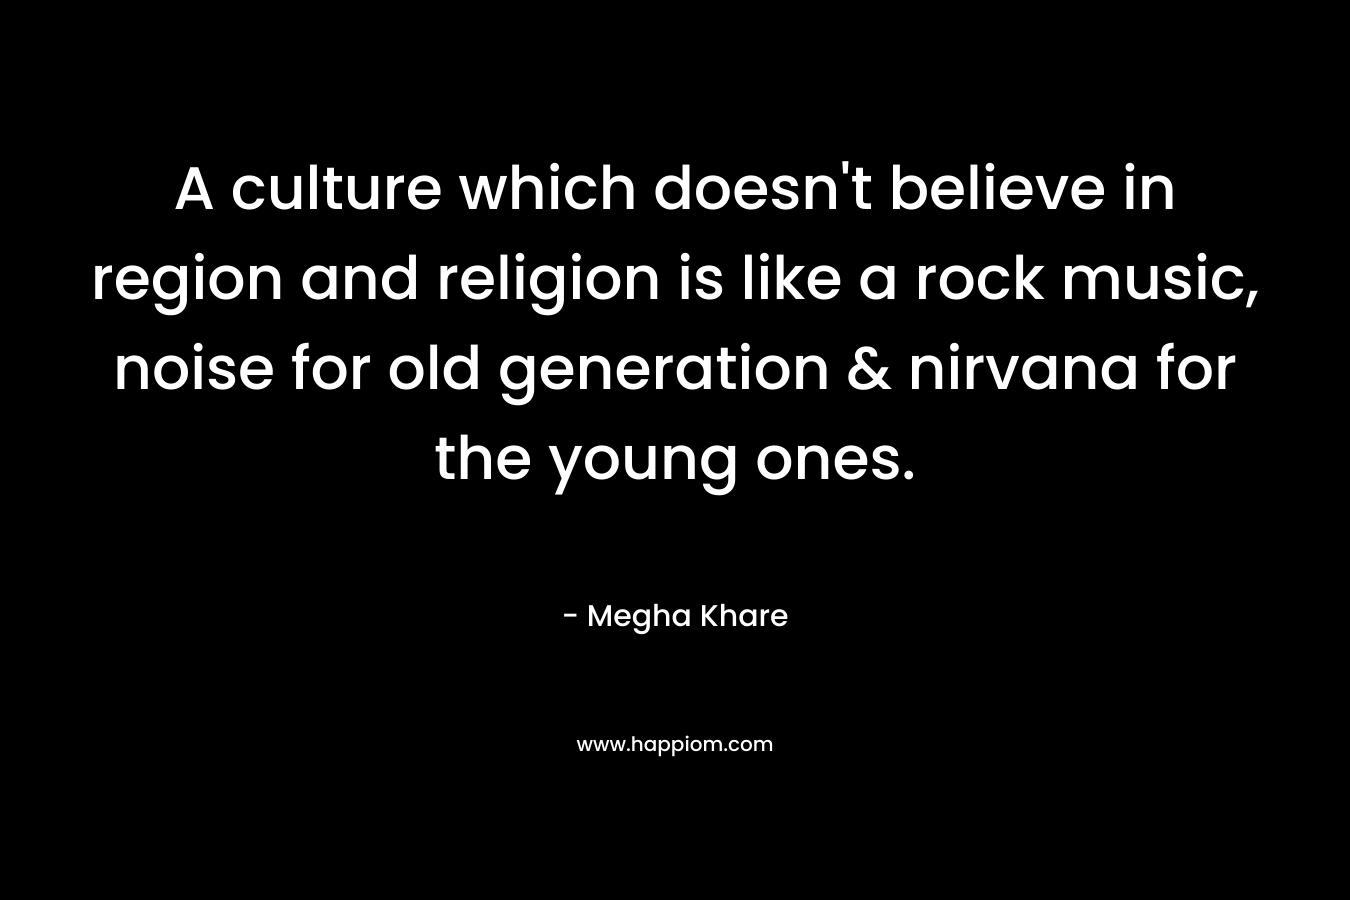 A culture which doesn't believe in region and religion is like a rock music, noise for old generation & nirvana for the young ones.